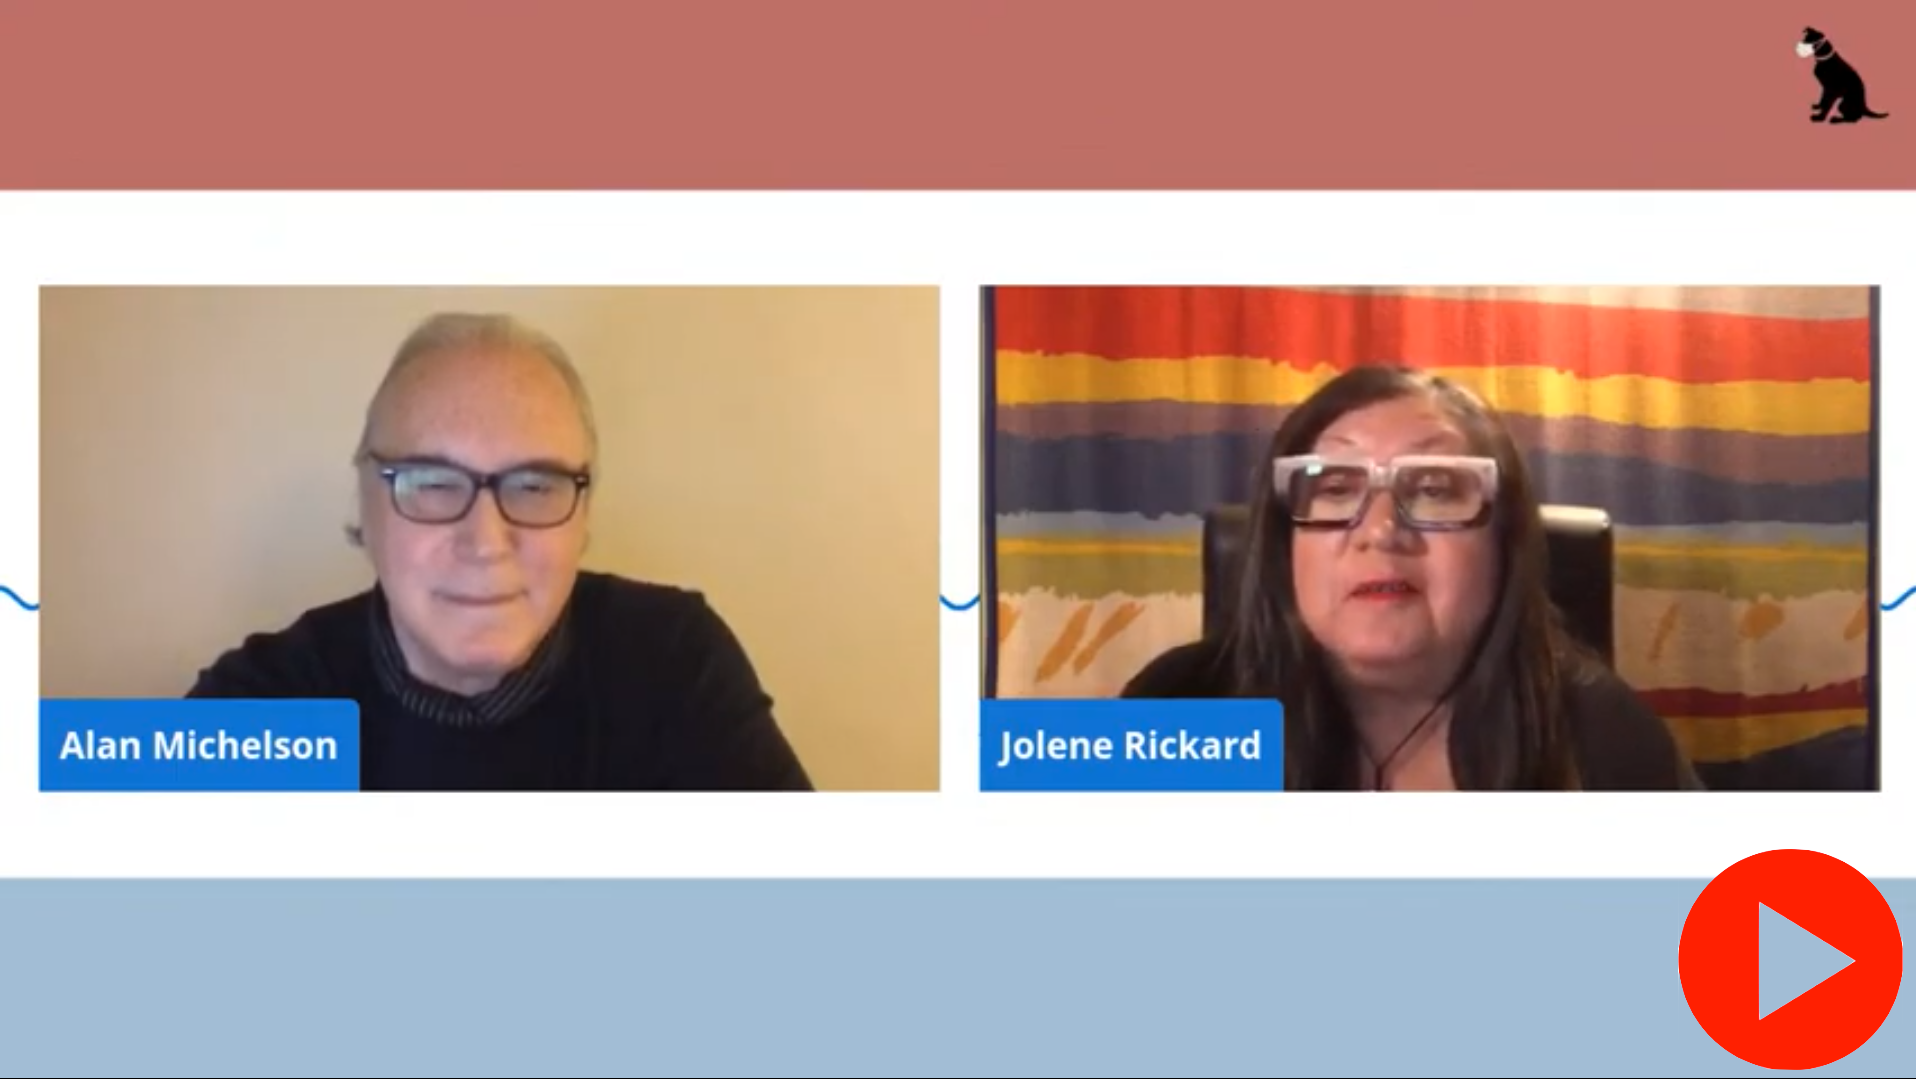 Image of Mohawk member of the Six Nations of the Grand River artist Alan Michelson on Zoom next to Indigenous scholar, Jolene Rickard, who wears dark rimmed glasses, a black sweater. He has gray hair and sits against a blank beige background. Jolene sits against a bright colorful backdrop and she wears dark rimmed glasses and has dark shoulder length hair. There is a red play button on the bottom right corner of the image.